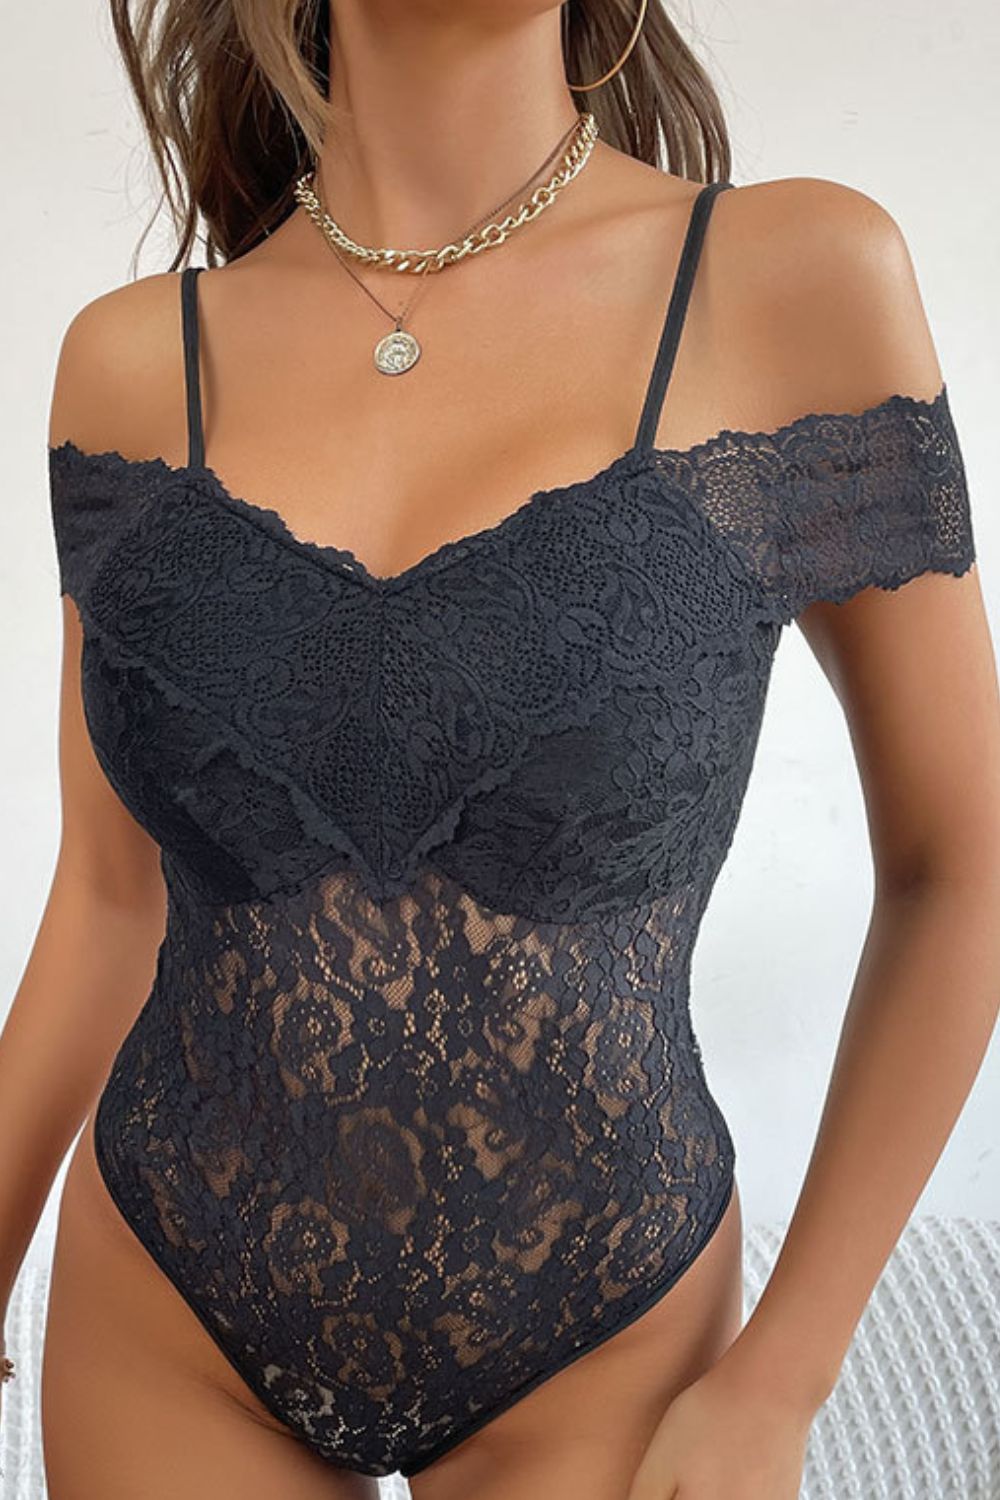 Enchantress of Desire - Ignite the Spark of Passion with Our Lace Cold-Shoulder Bodysuit - Feel Beautiful and Desired. - Guy Christopher